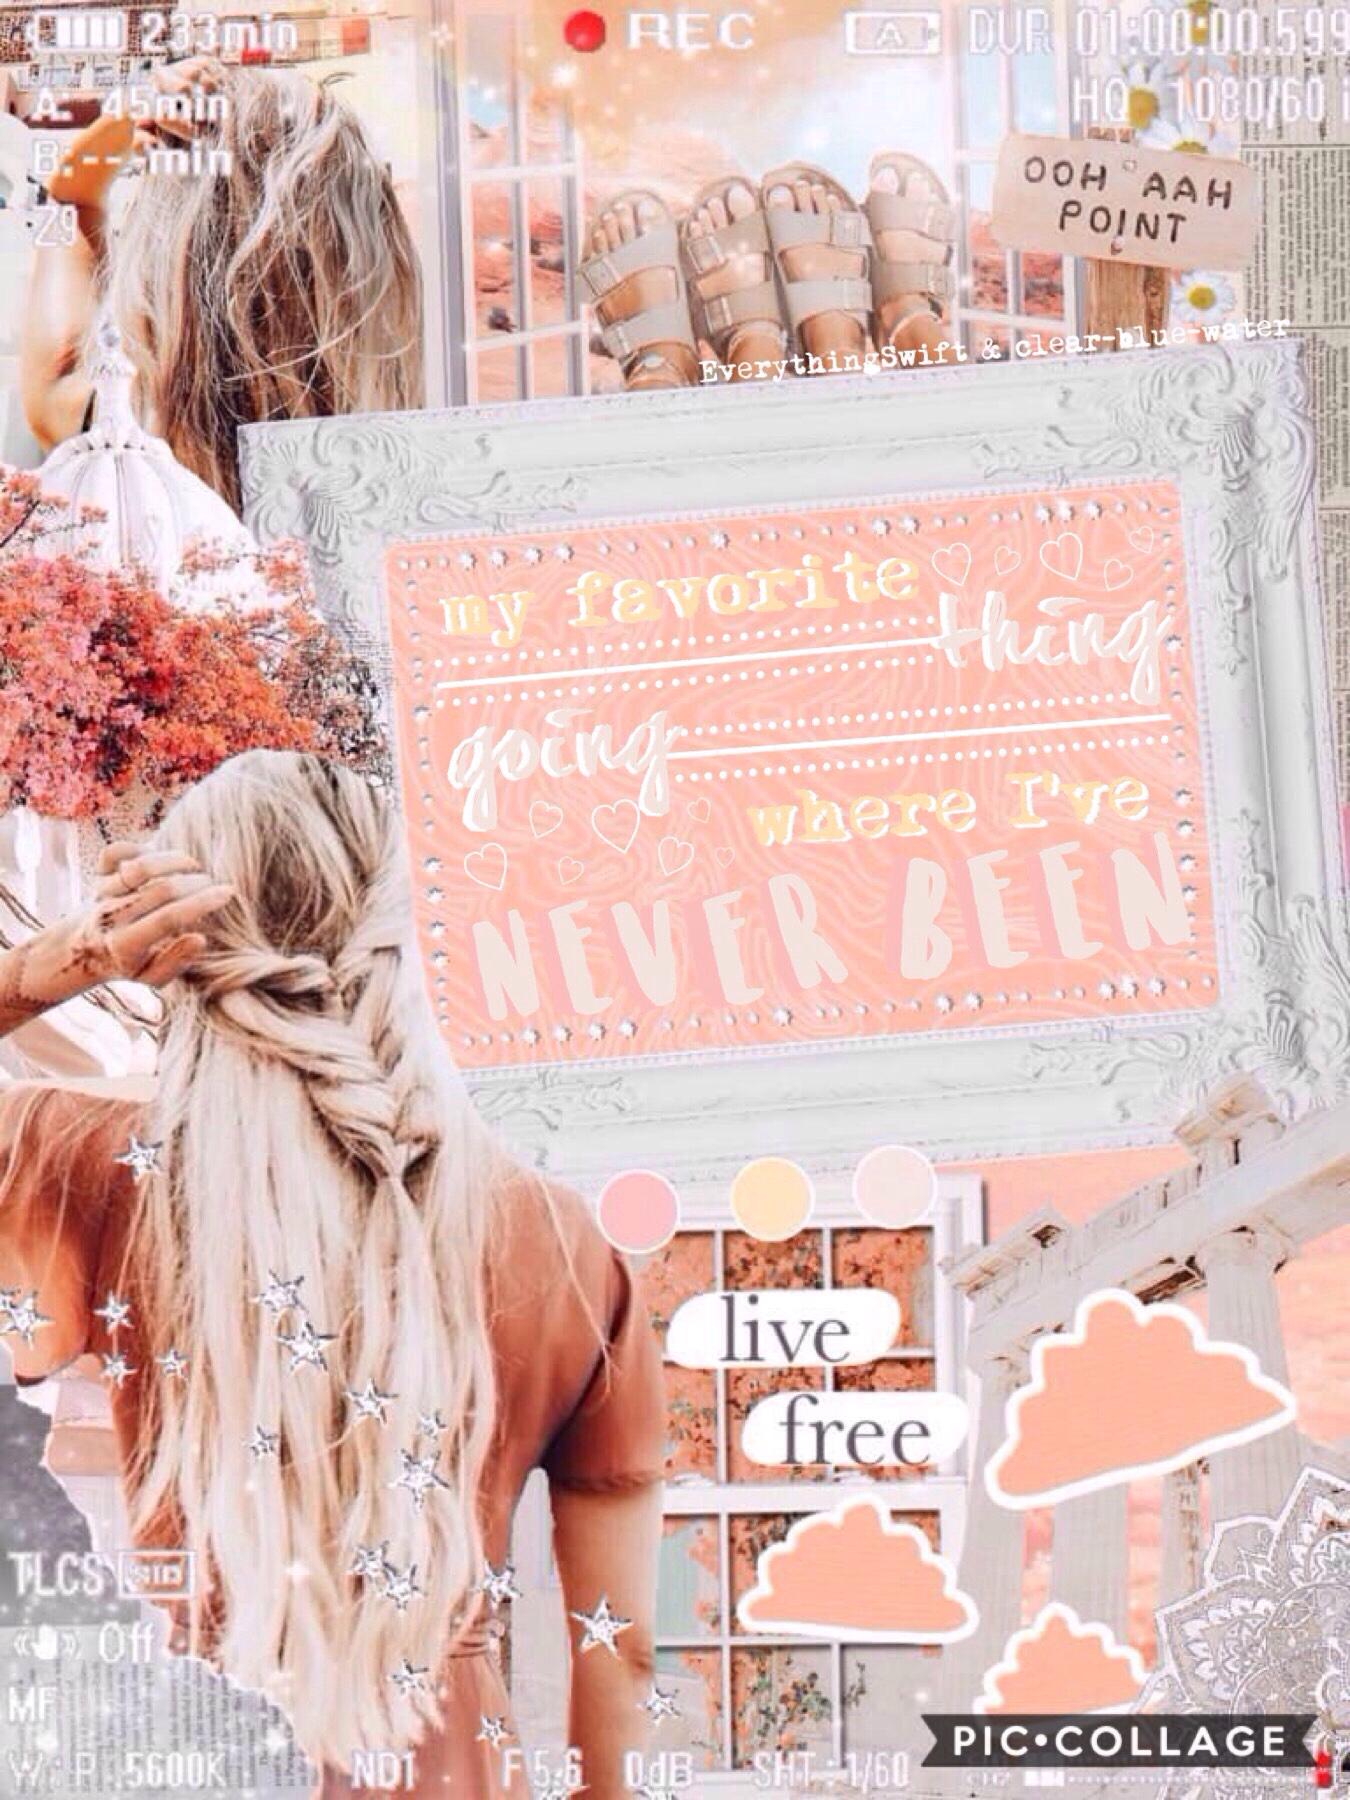 🌸T A P🌸
Collab so my bestie  EverythingSwift. Sorry for so much inactivity. I love you guys and I'm so sorry for inactivity but I'm gonna try to get more collages done.
QOTD: What are your favorite apps?
AOTD: PC, Pinterest, and Insta